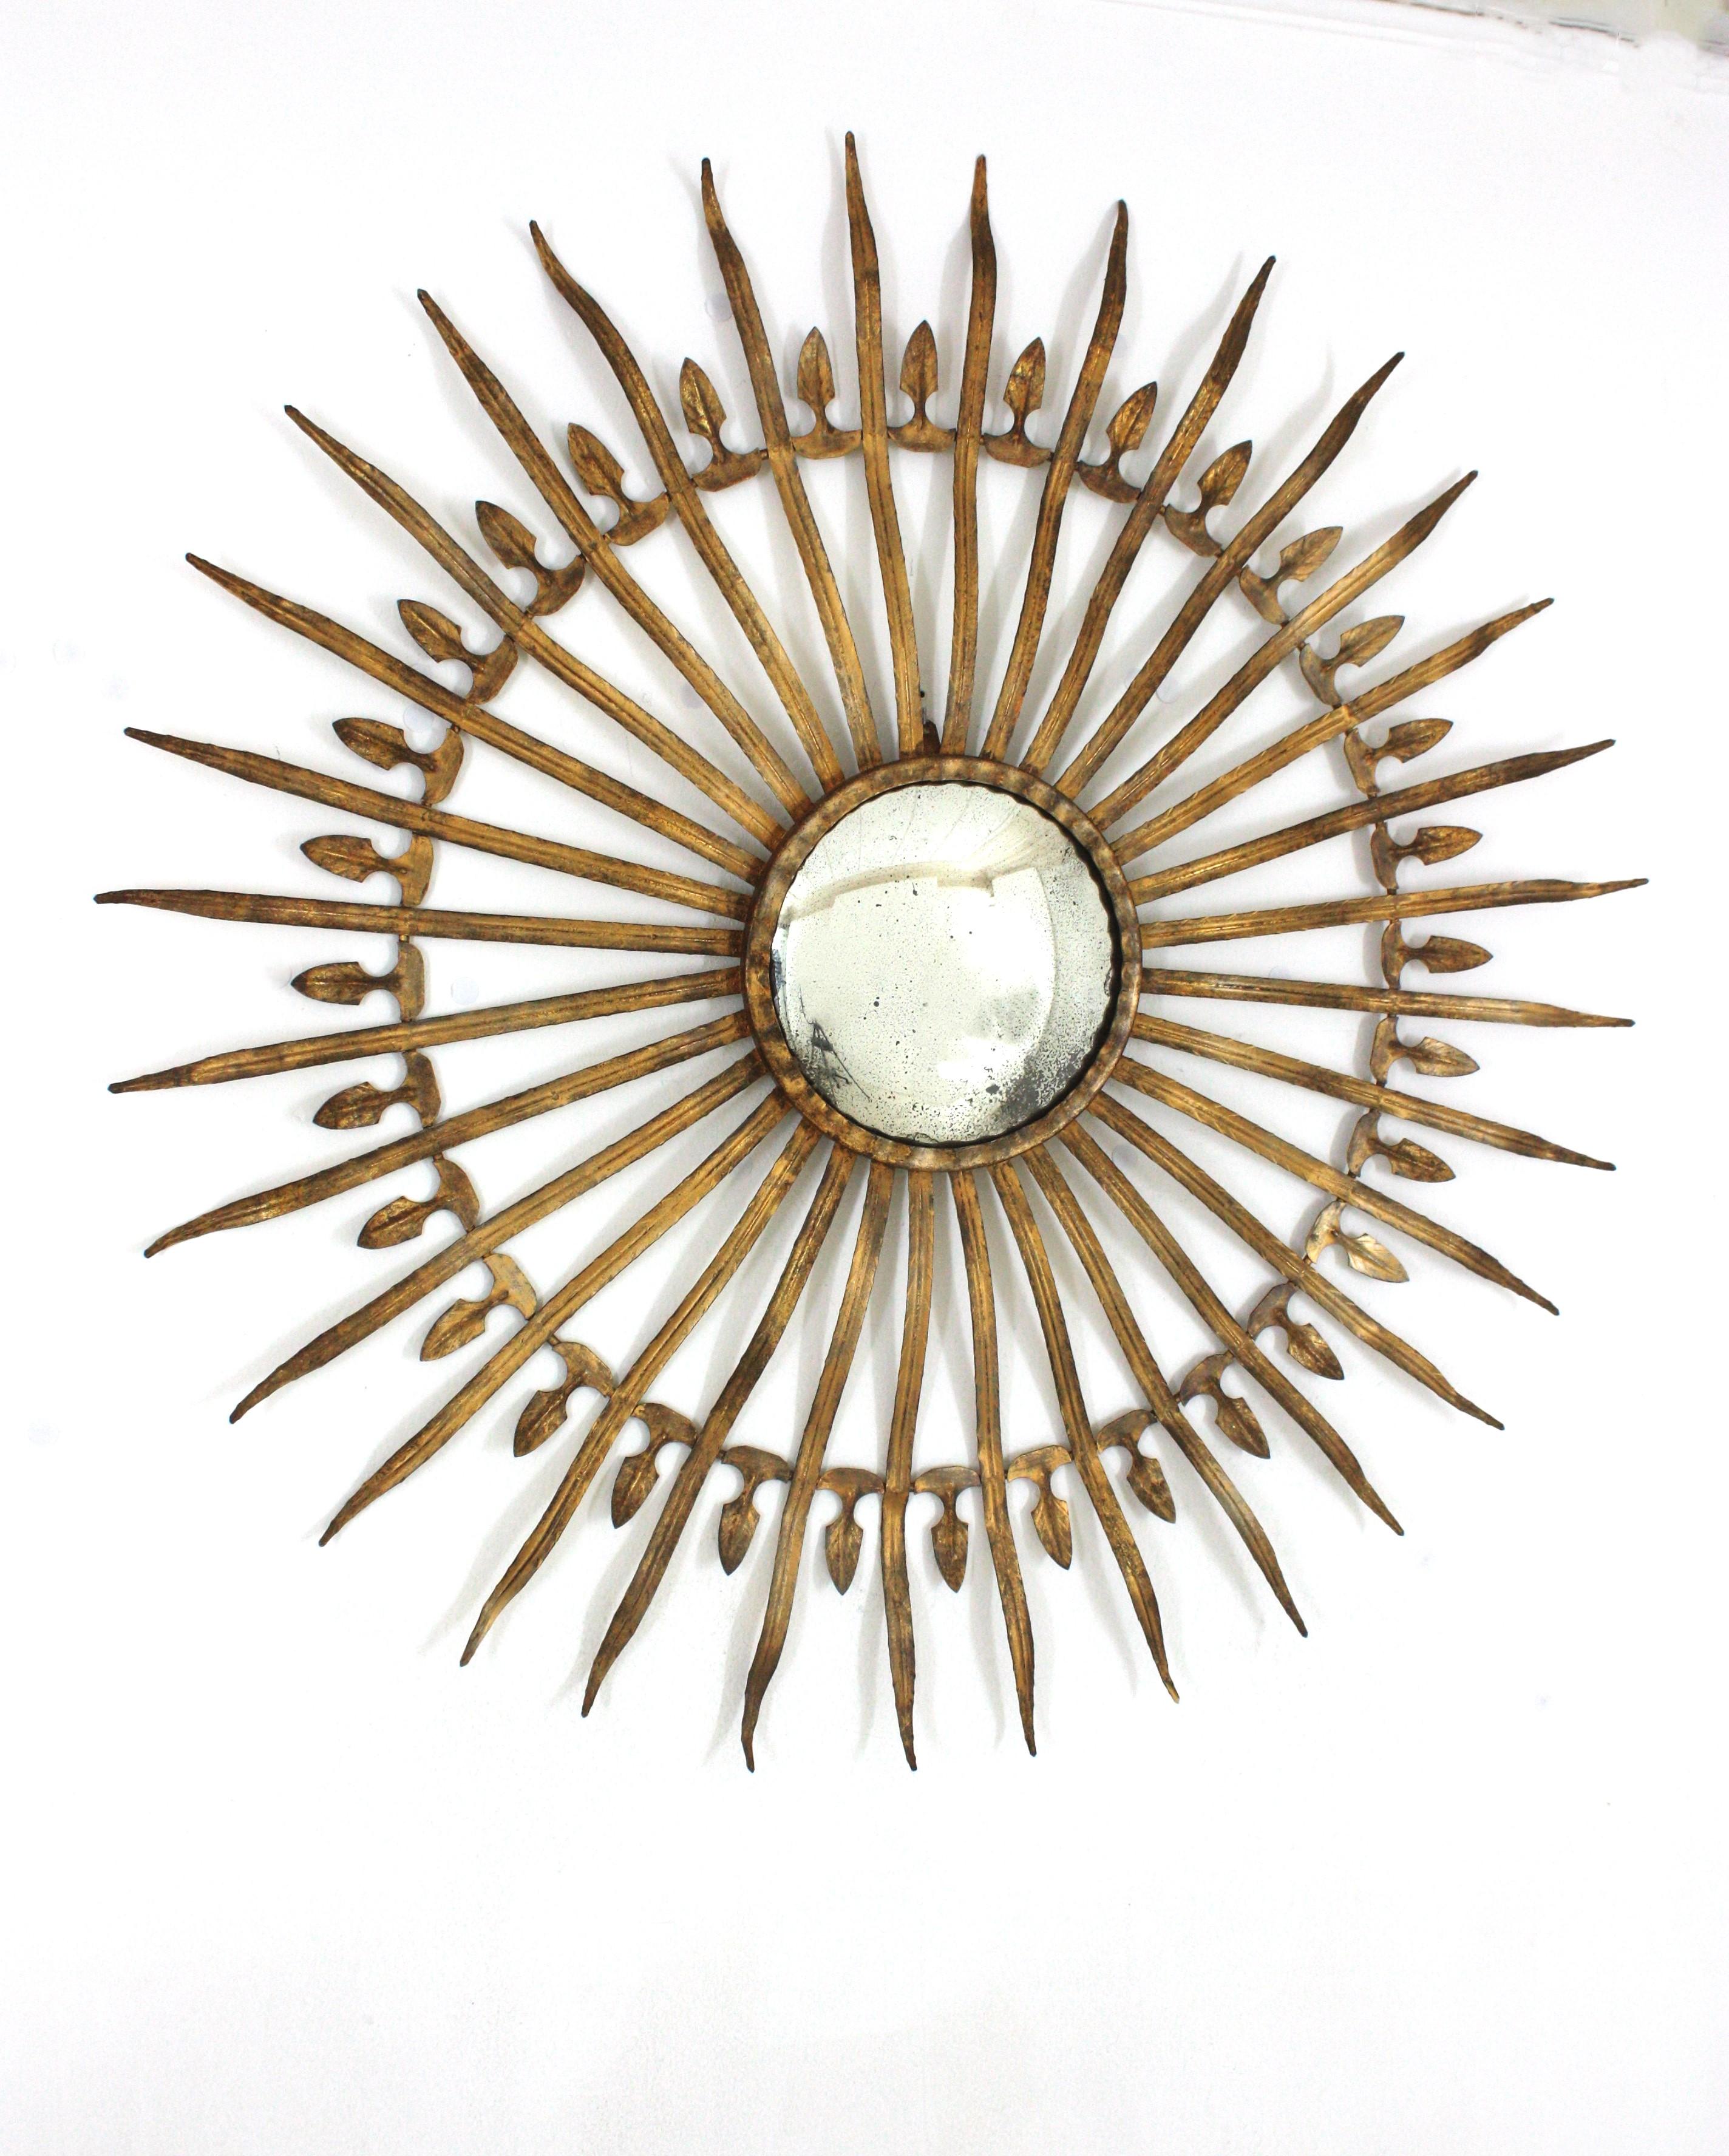 Large Scale Oversized Sunburst Mirror, Iron, Gold Leaf
Outstanding Hollywood Regency gilt wrought iron convex sunburst /starburst mirror, Spain 1950s
Extra large size (39,37 inches) and convex glass mirror. It has a terrific aged patina with gold